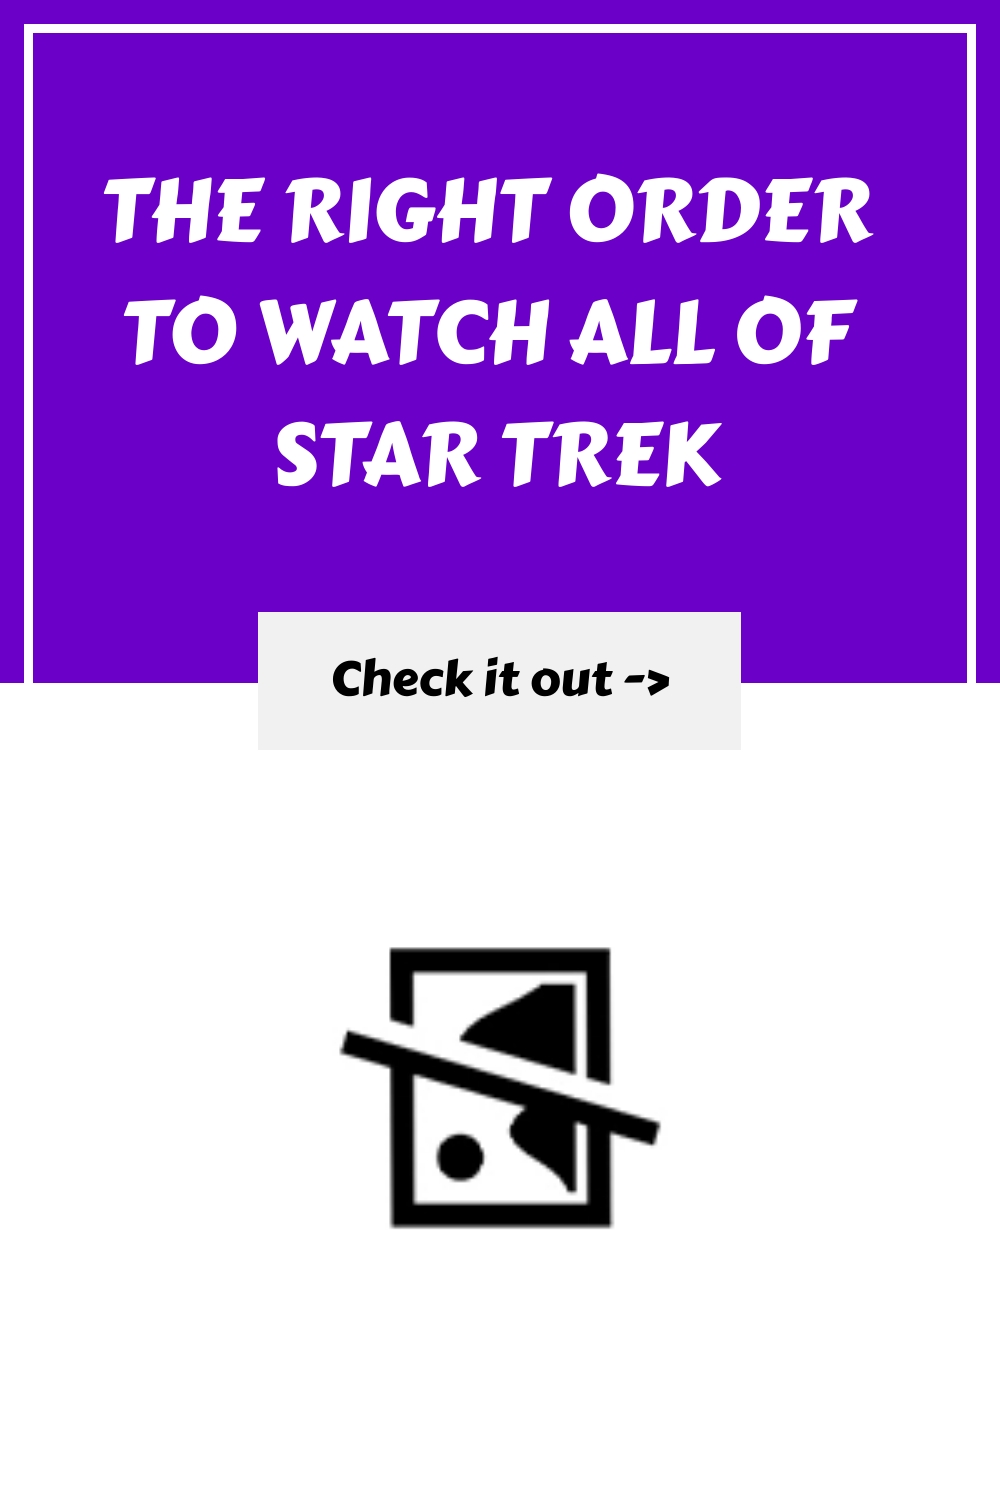 The Right Order to Watch ALL of Star Trek generated pin 56397 2